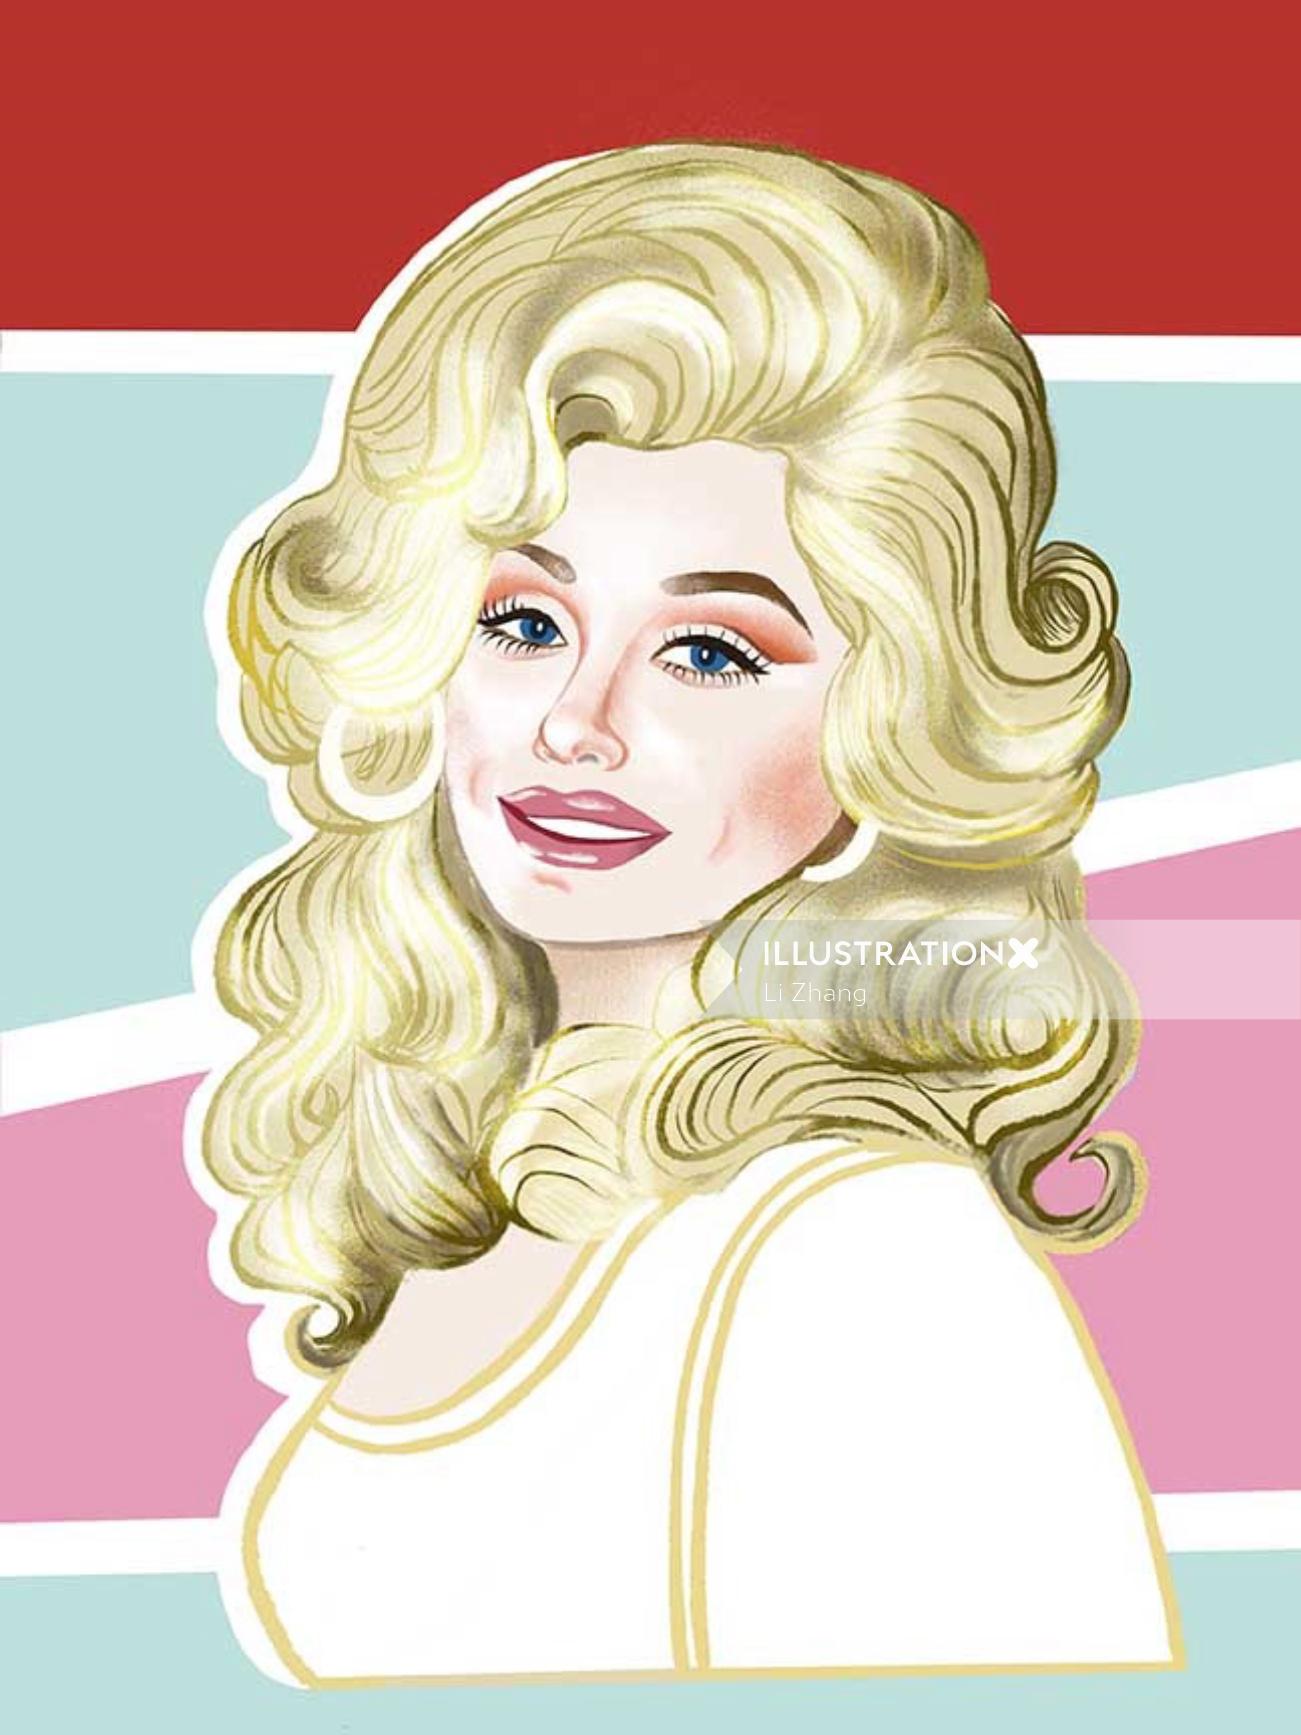 The portrait of Dolly Parton for CPG brand packaging